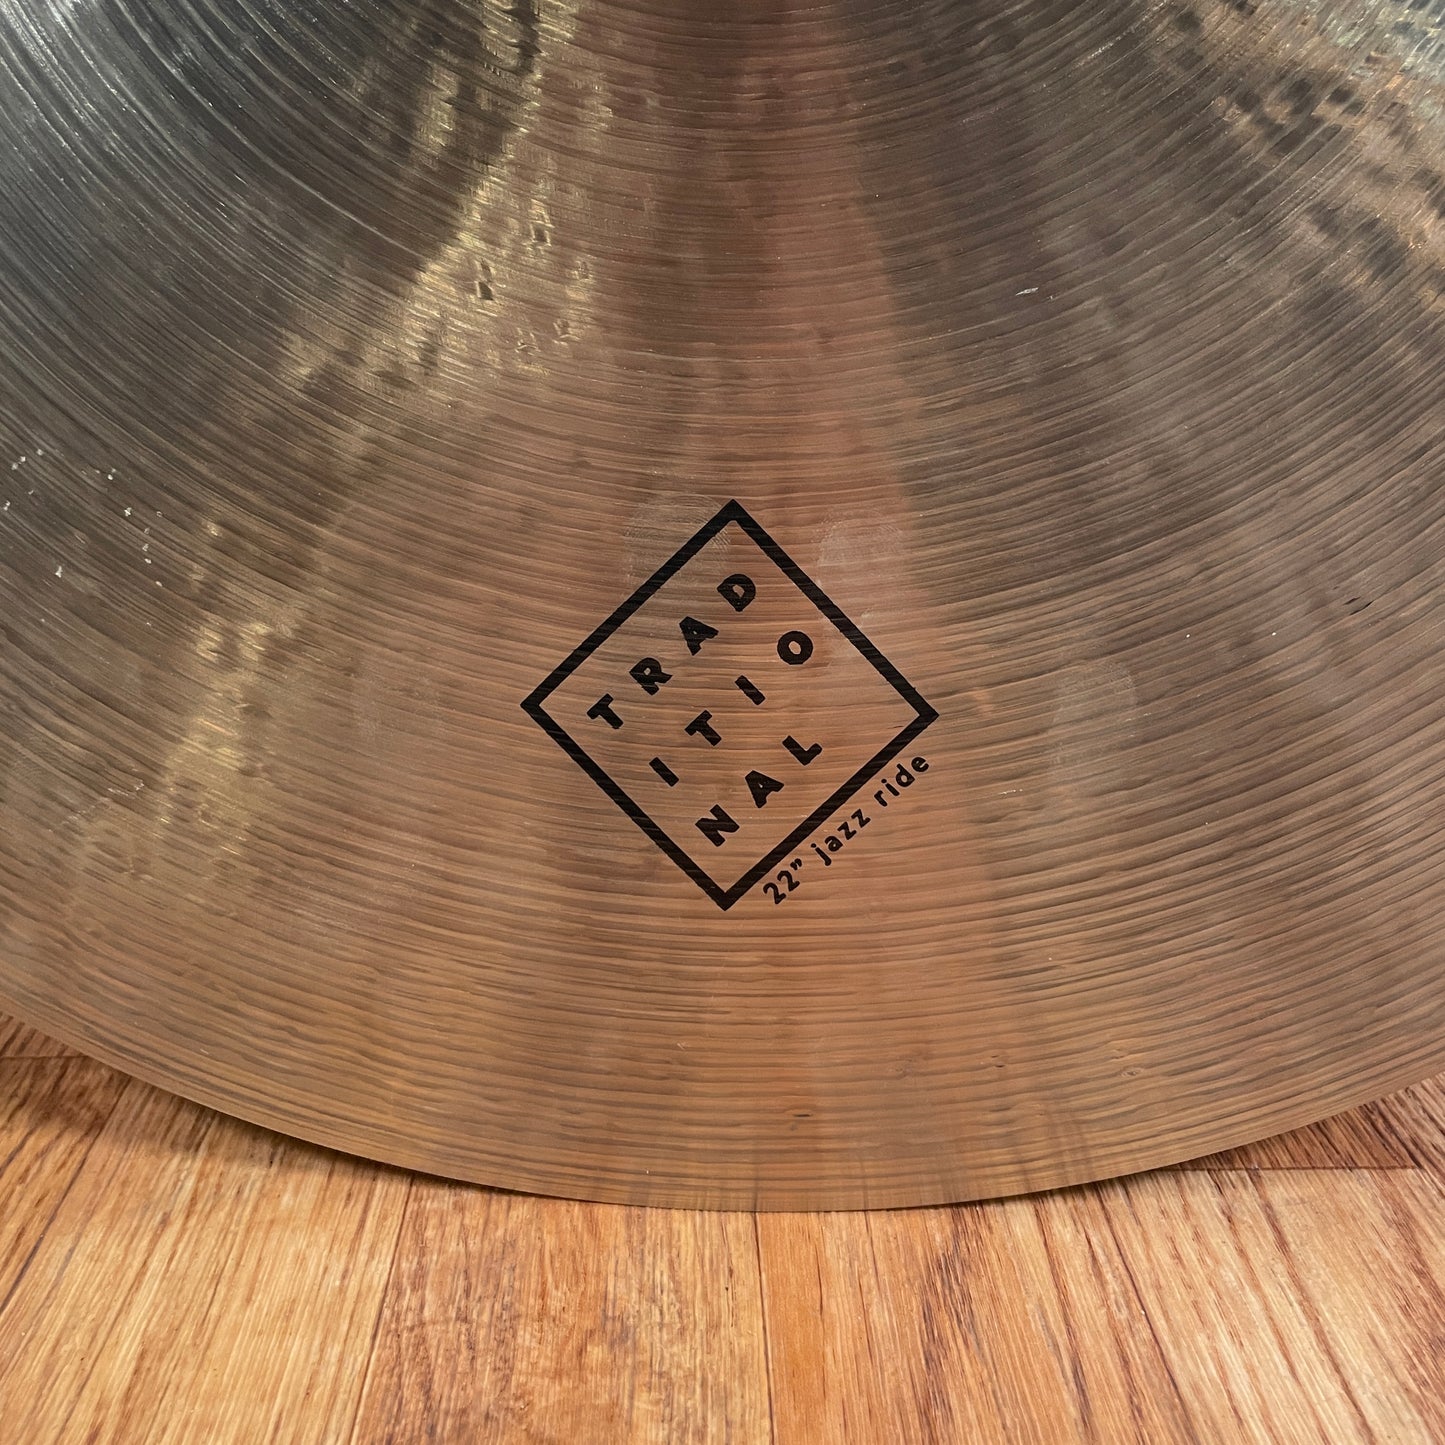 22" Istanbul Agop Traditional Jazz Ride Cymbal 2316g *Video Demo*